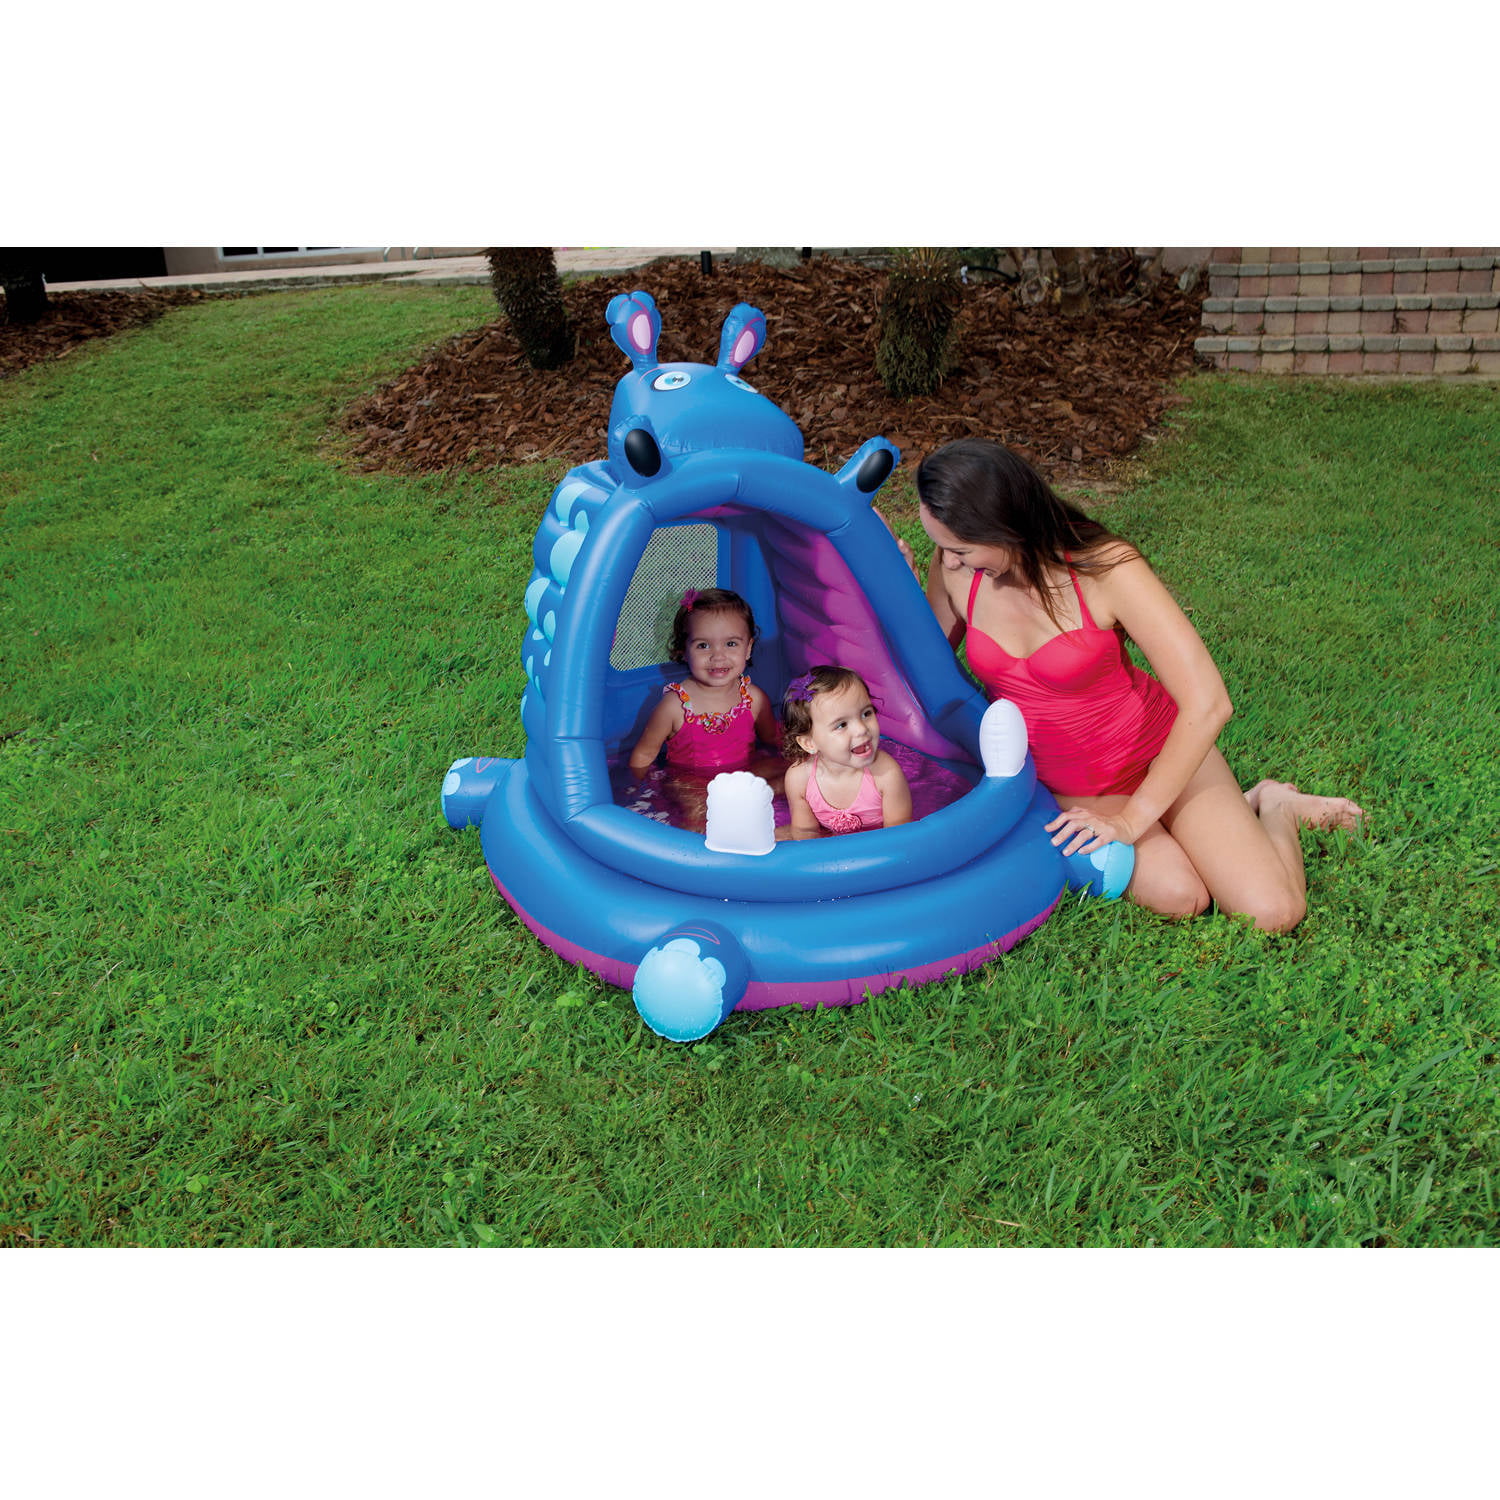 NEW Inflatable Turtle Baby Pool Partial Sunshade Water Sprayer Infant Child 